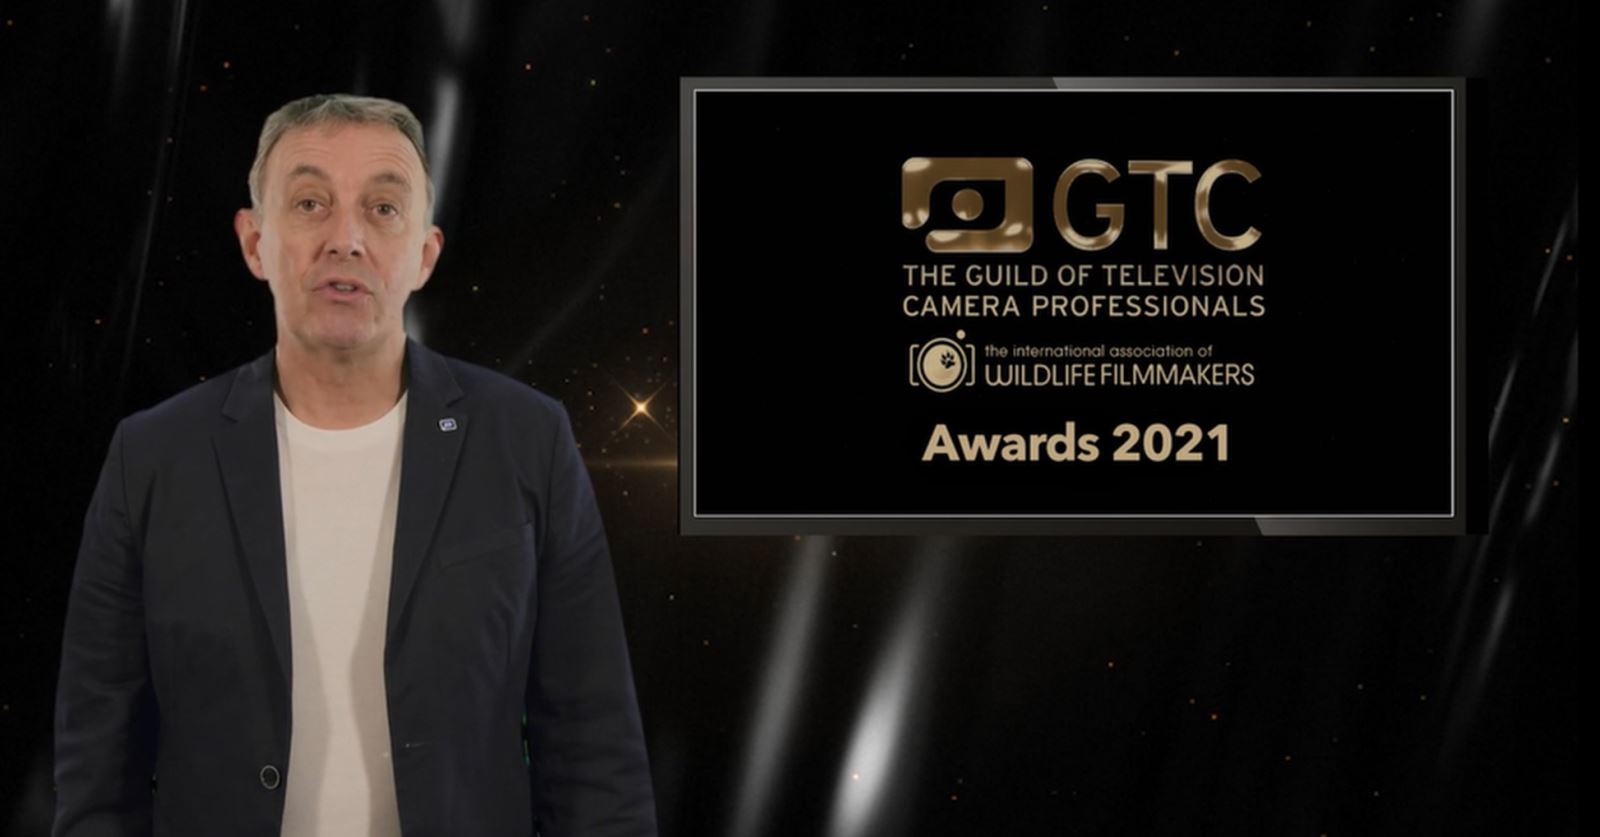 Congratulations to all the GTC Award Winners 2021 - watch the Awards now